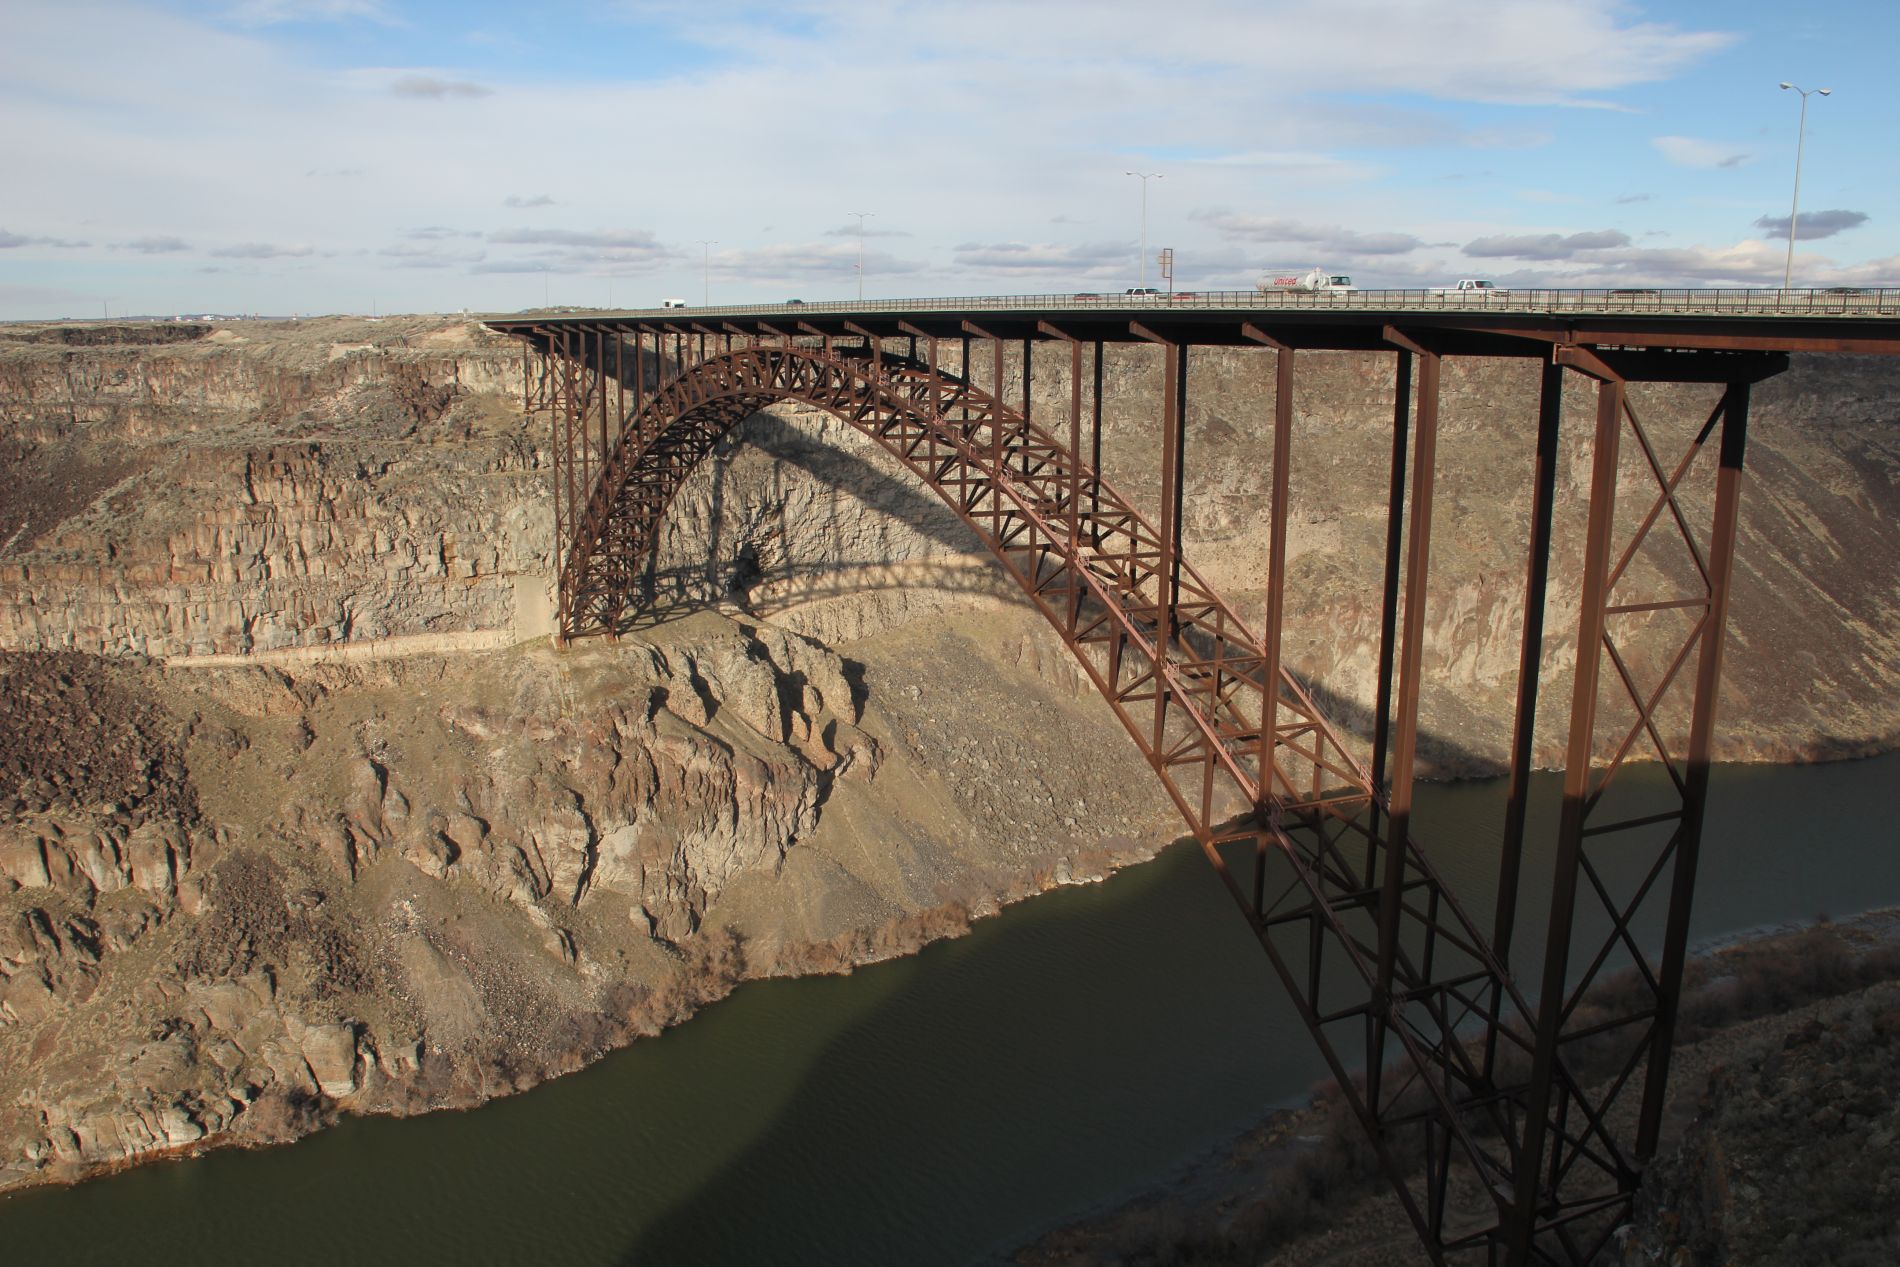 Snake River Canyon Evel Knievel jump point in Twin Falls, Idaho